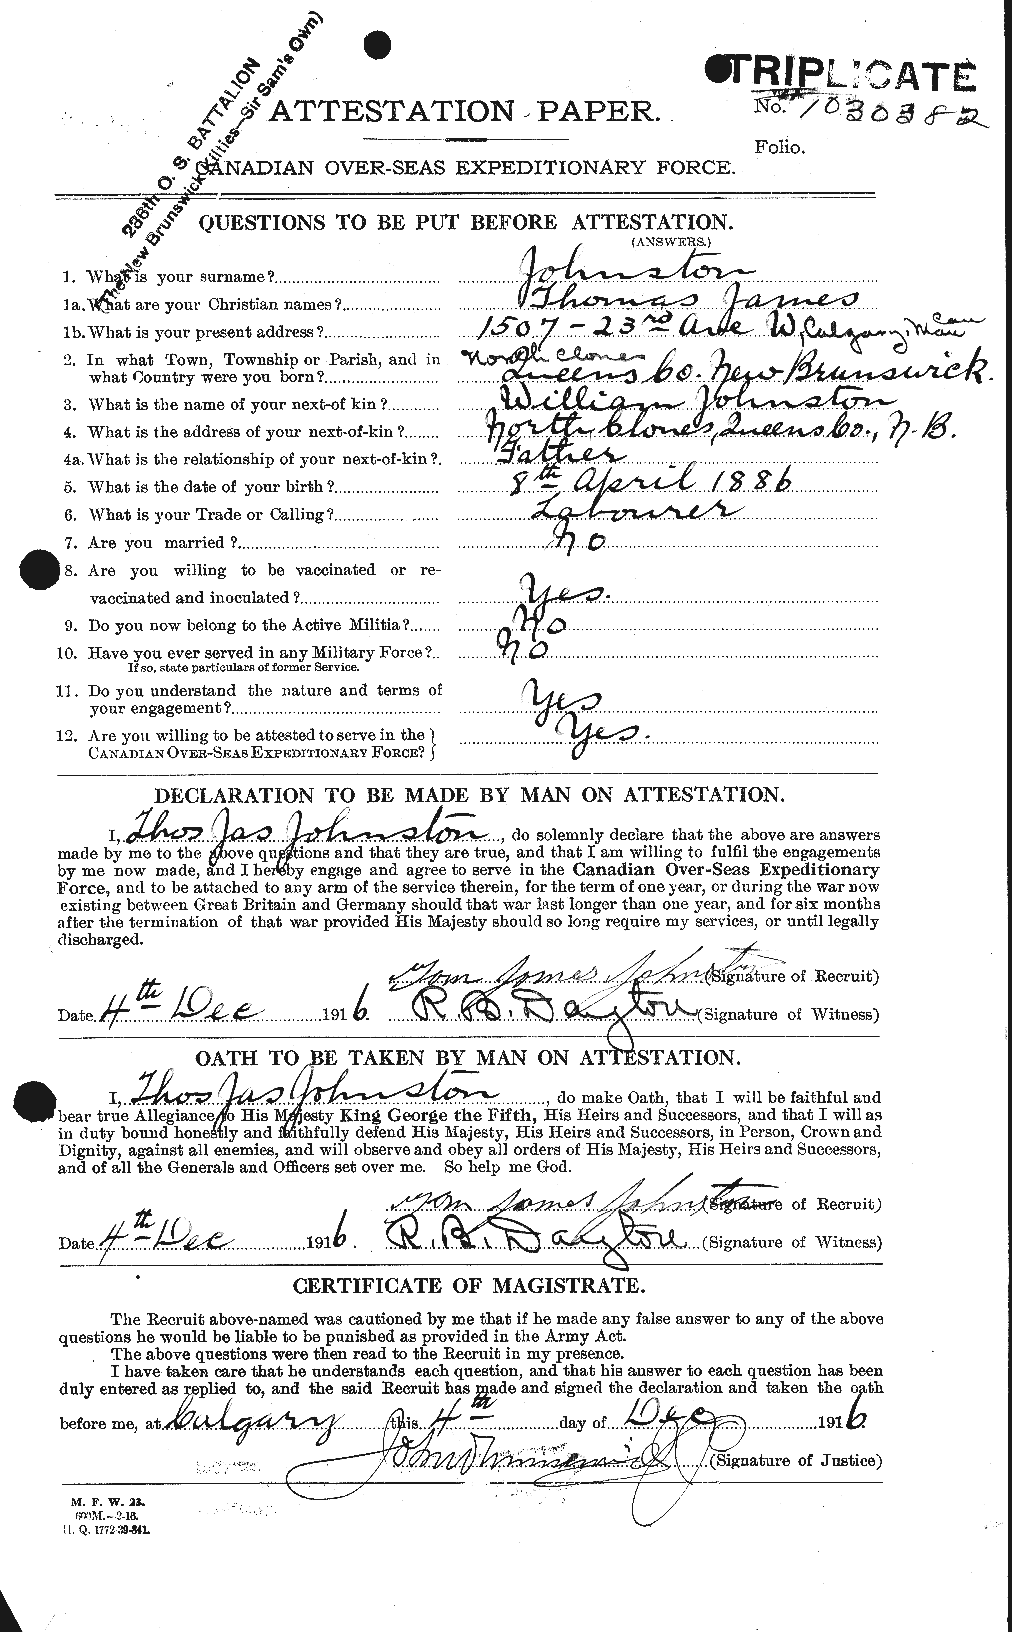 Personnel Records of the First World War - CEF 427168a